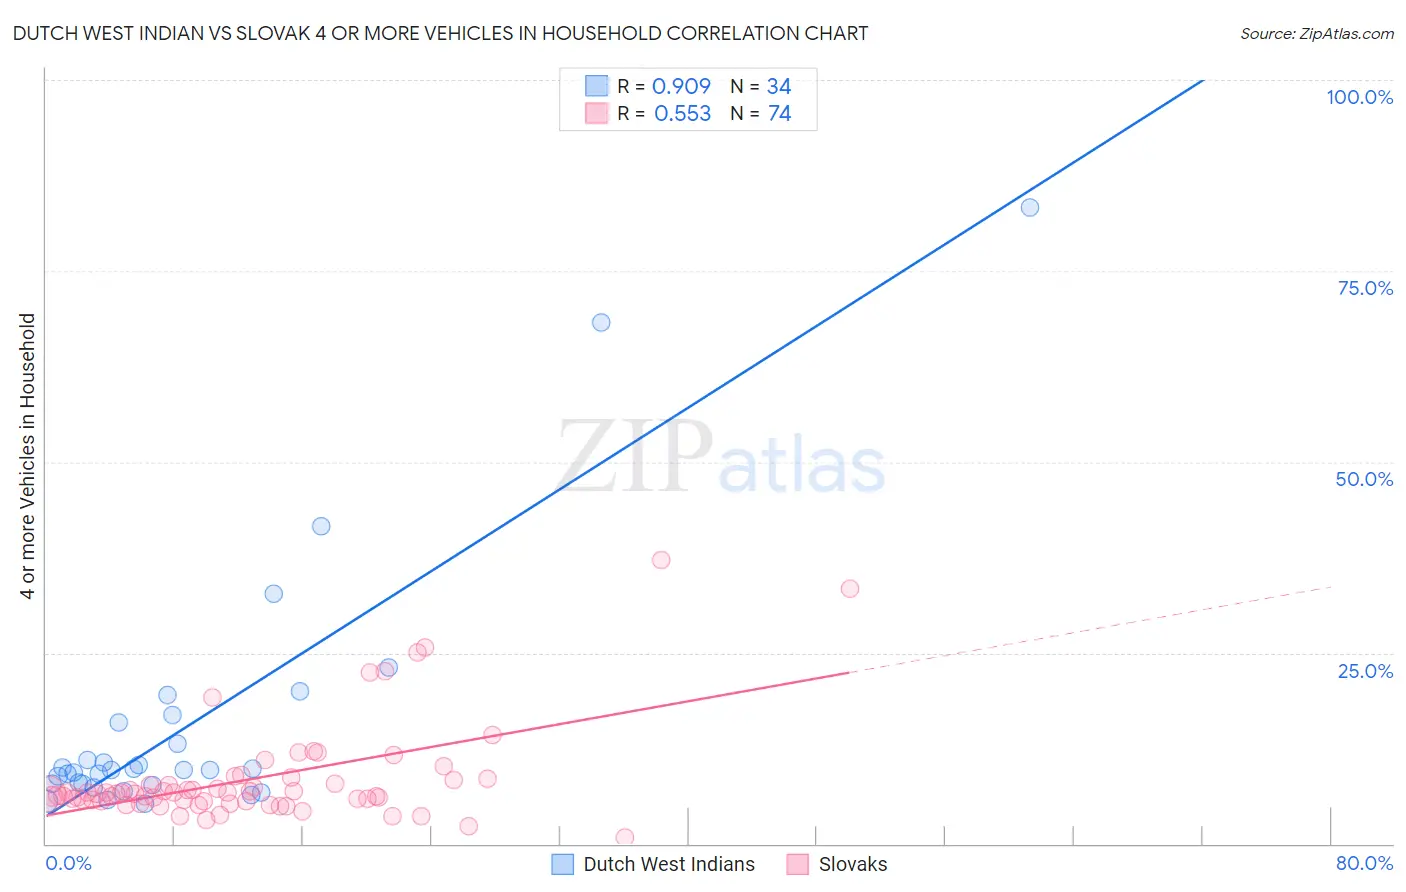 Dutch West Indian vs Slovak 4 or more Vehicles in Household